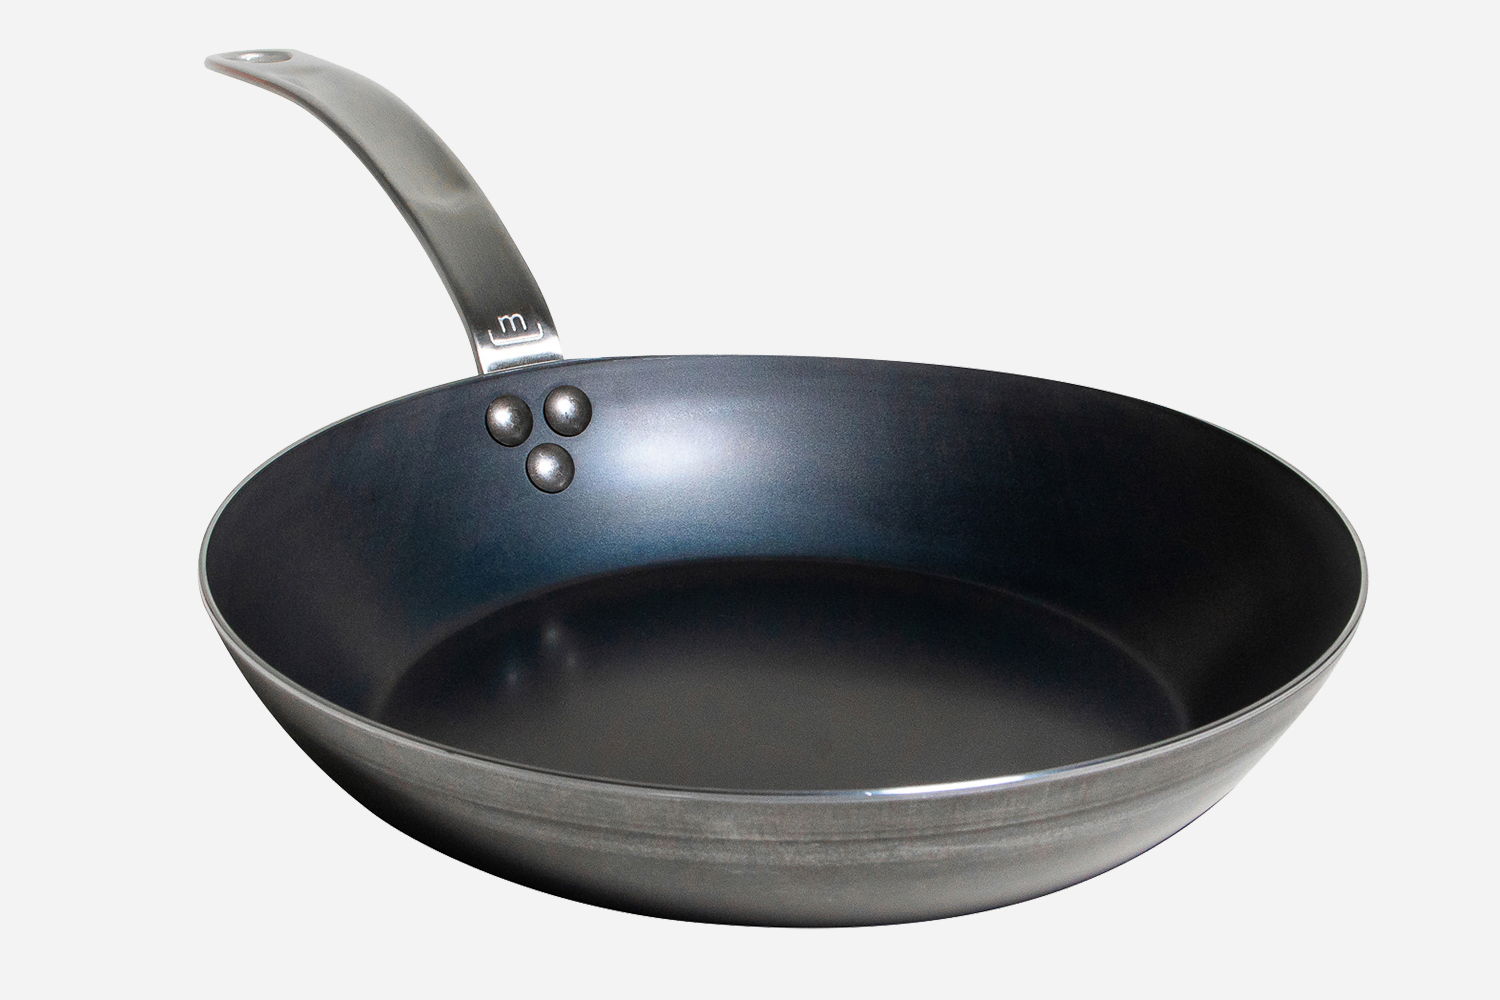 Made In Cookware Review (Nonstick, Stainless & Carbon Steel)